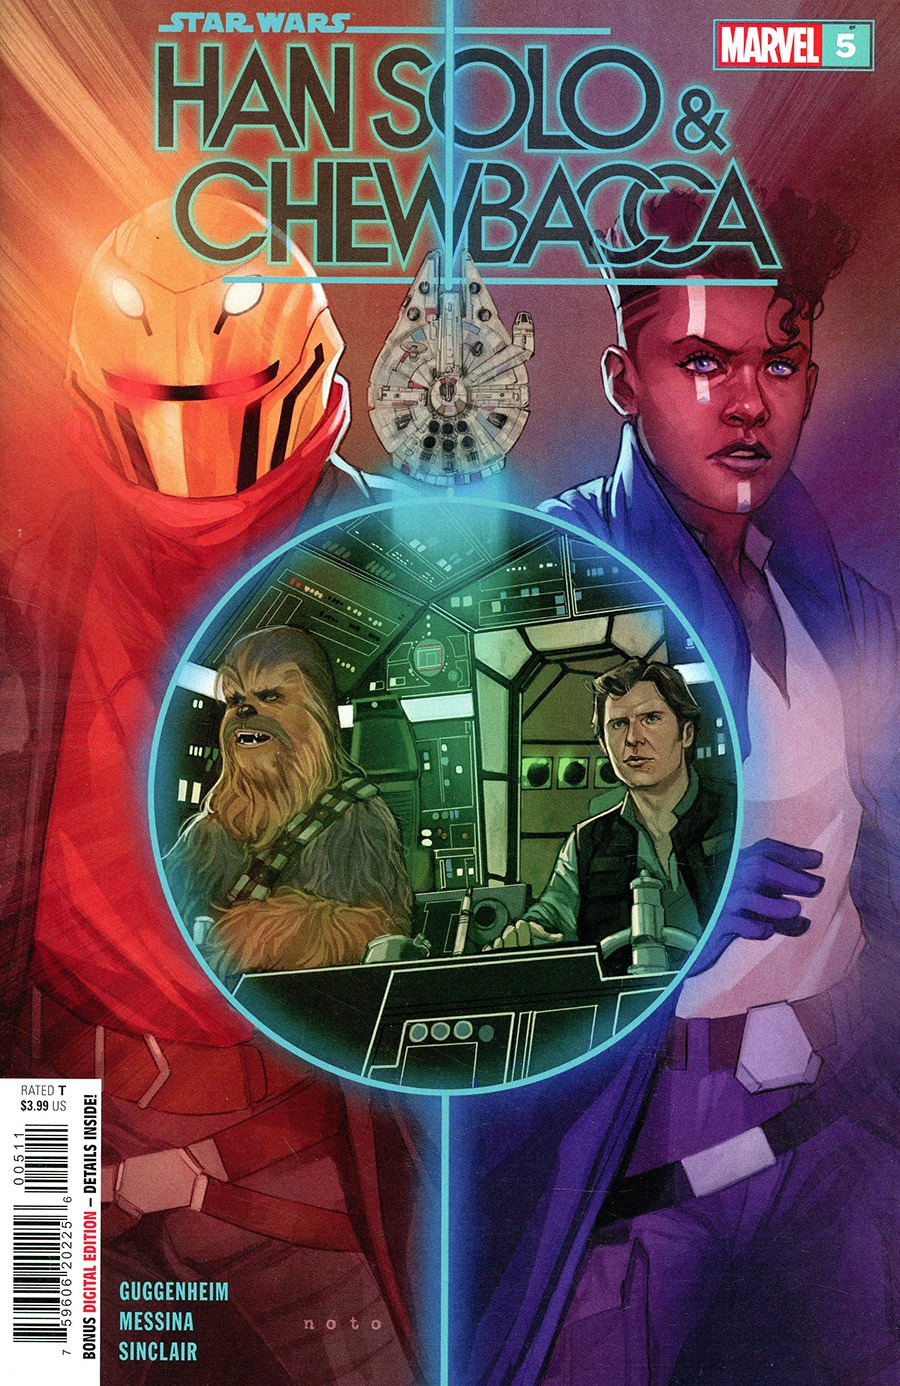 Star Wars Han Solo & Chewbacca #5 Cover A Regular Phil Noto Cover